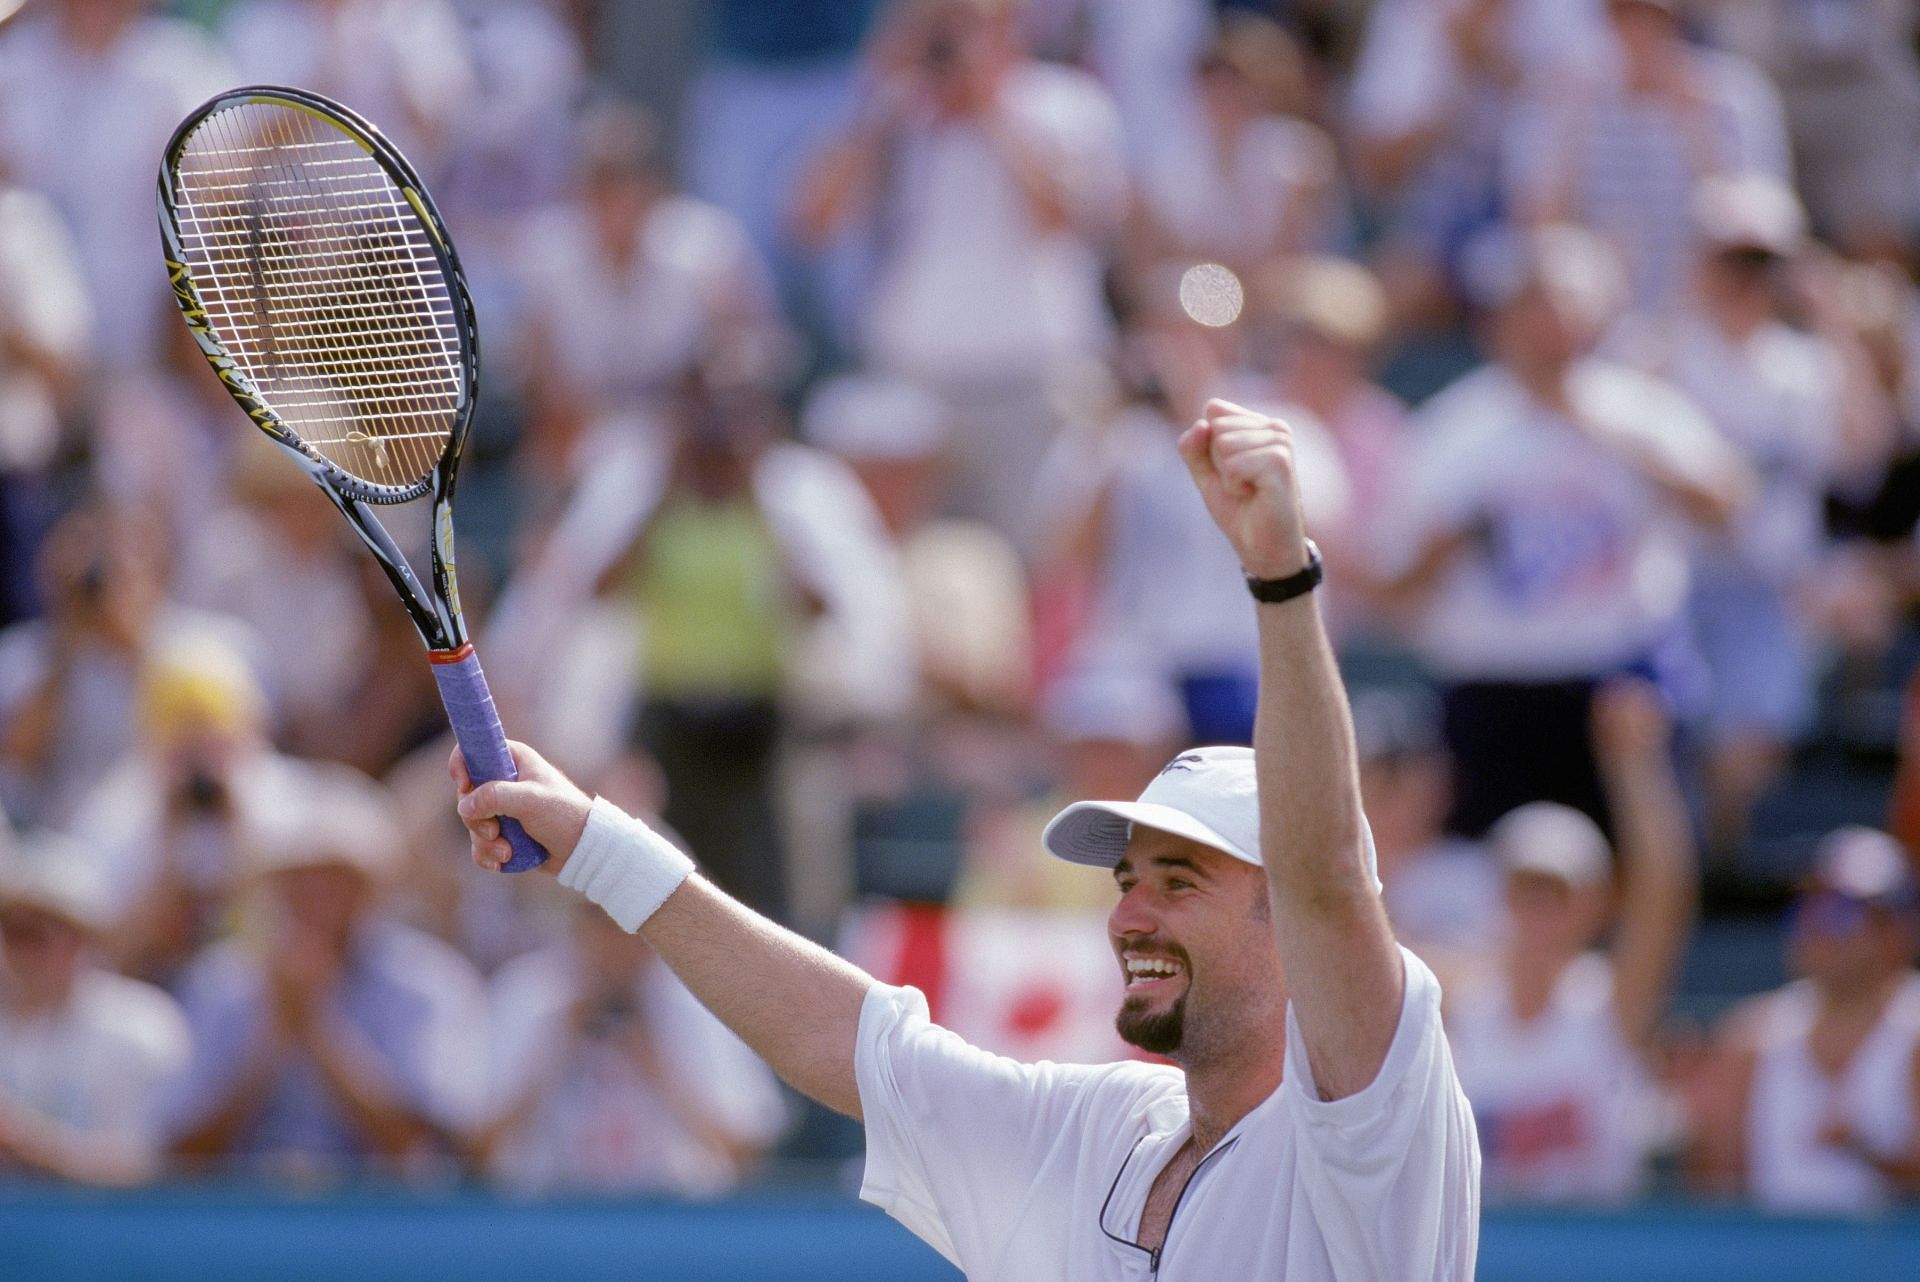 Andre Agassi celebrates winning the gold medal at the Atlanta Olympics.